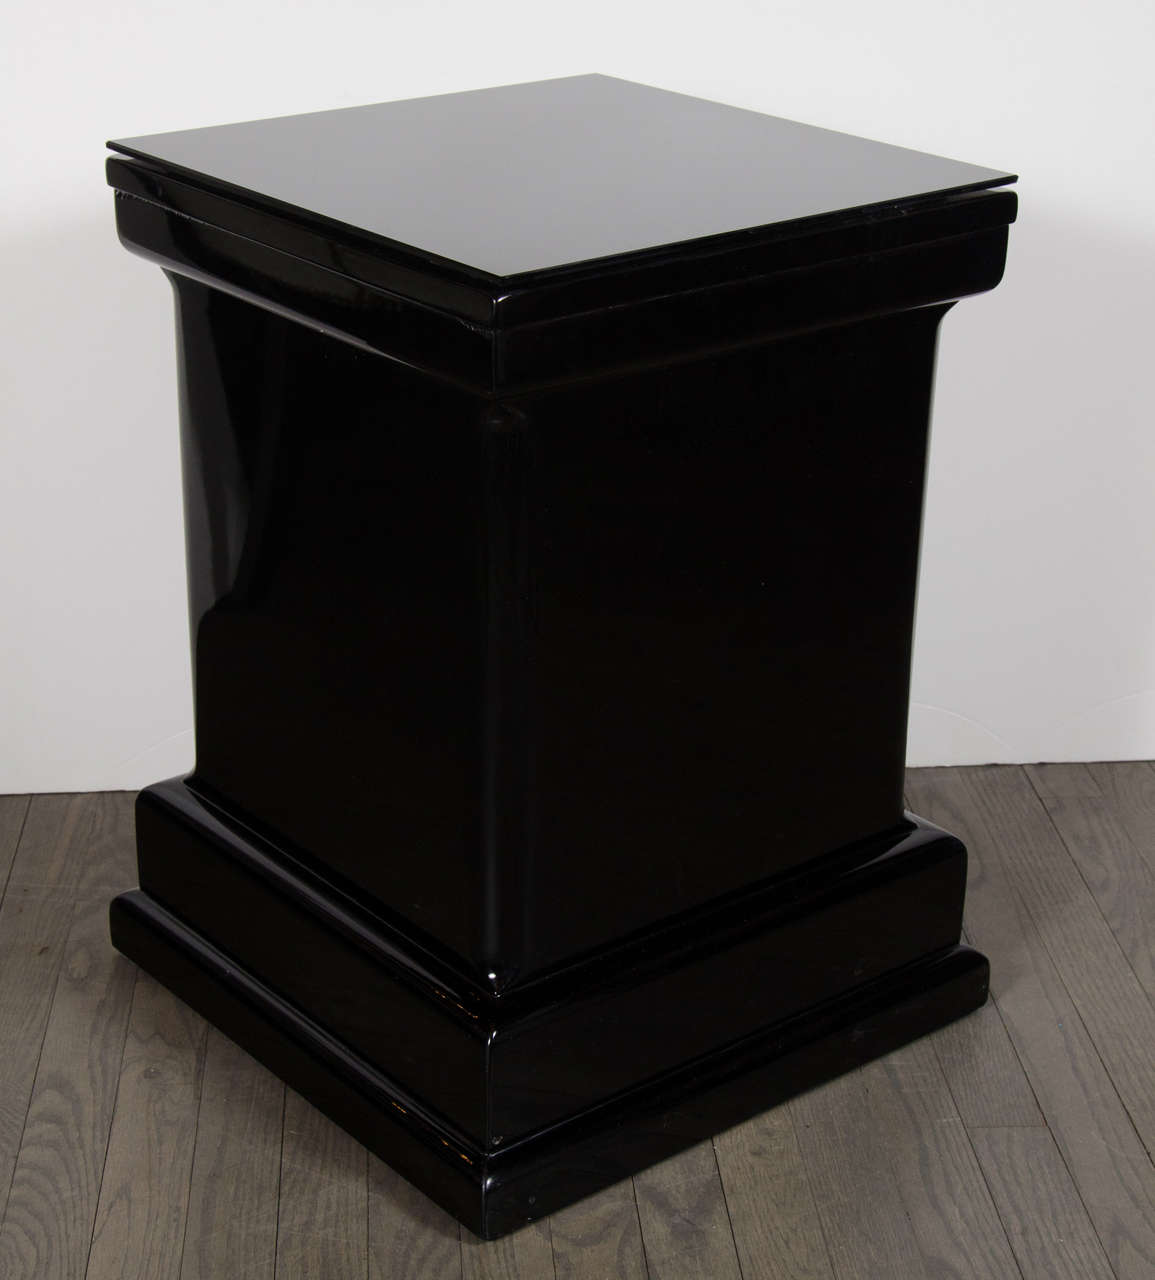 This exceptional pair of Art Deco Style end tables features a skyscraper pedestal form with black vitrolite tops. These would make any grandiose accent ostentatious adding wonderful style to any room. They can also be used as pedestals side tables